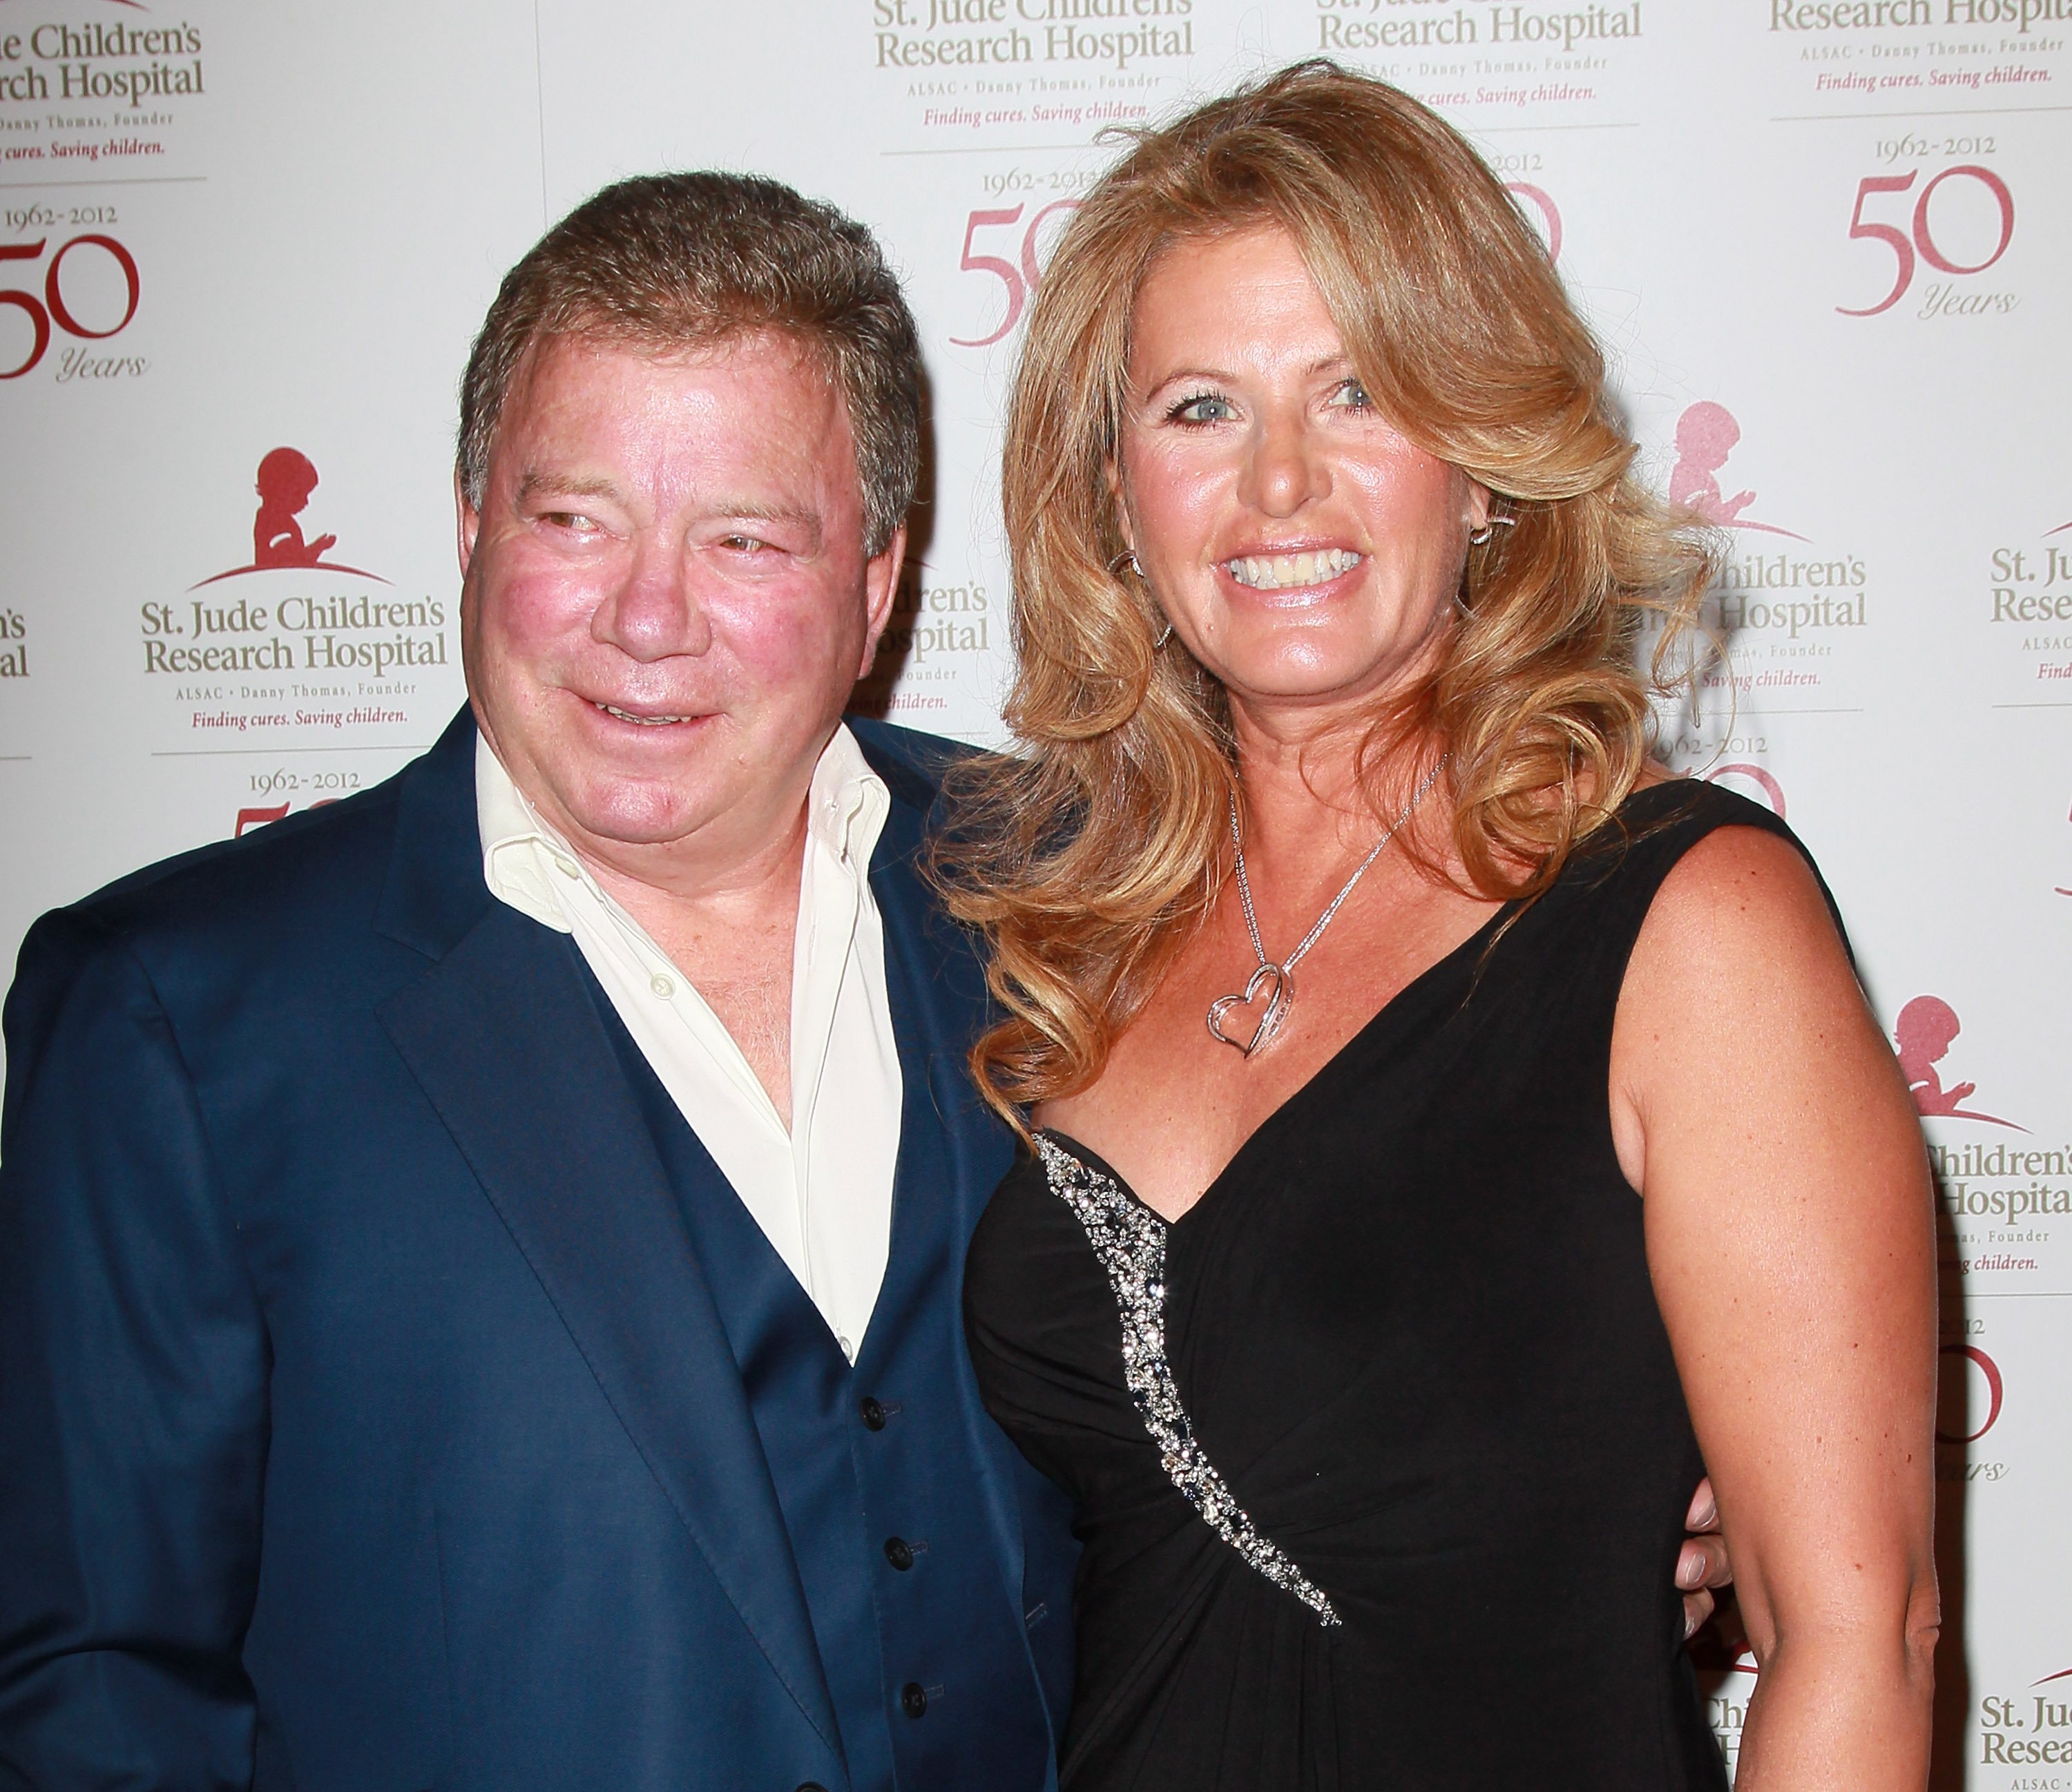 William Shatner (L) and wife Elizabeth Shatner attend the 50th anniversary celebration for St. Jude Children's Research Hospital at The Beverly Hilton hotel on January 7, 2012, in Beverly Hills, California. | Source: Getty Images.